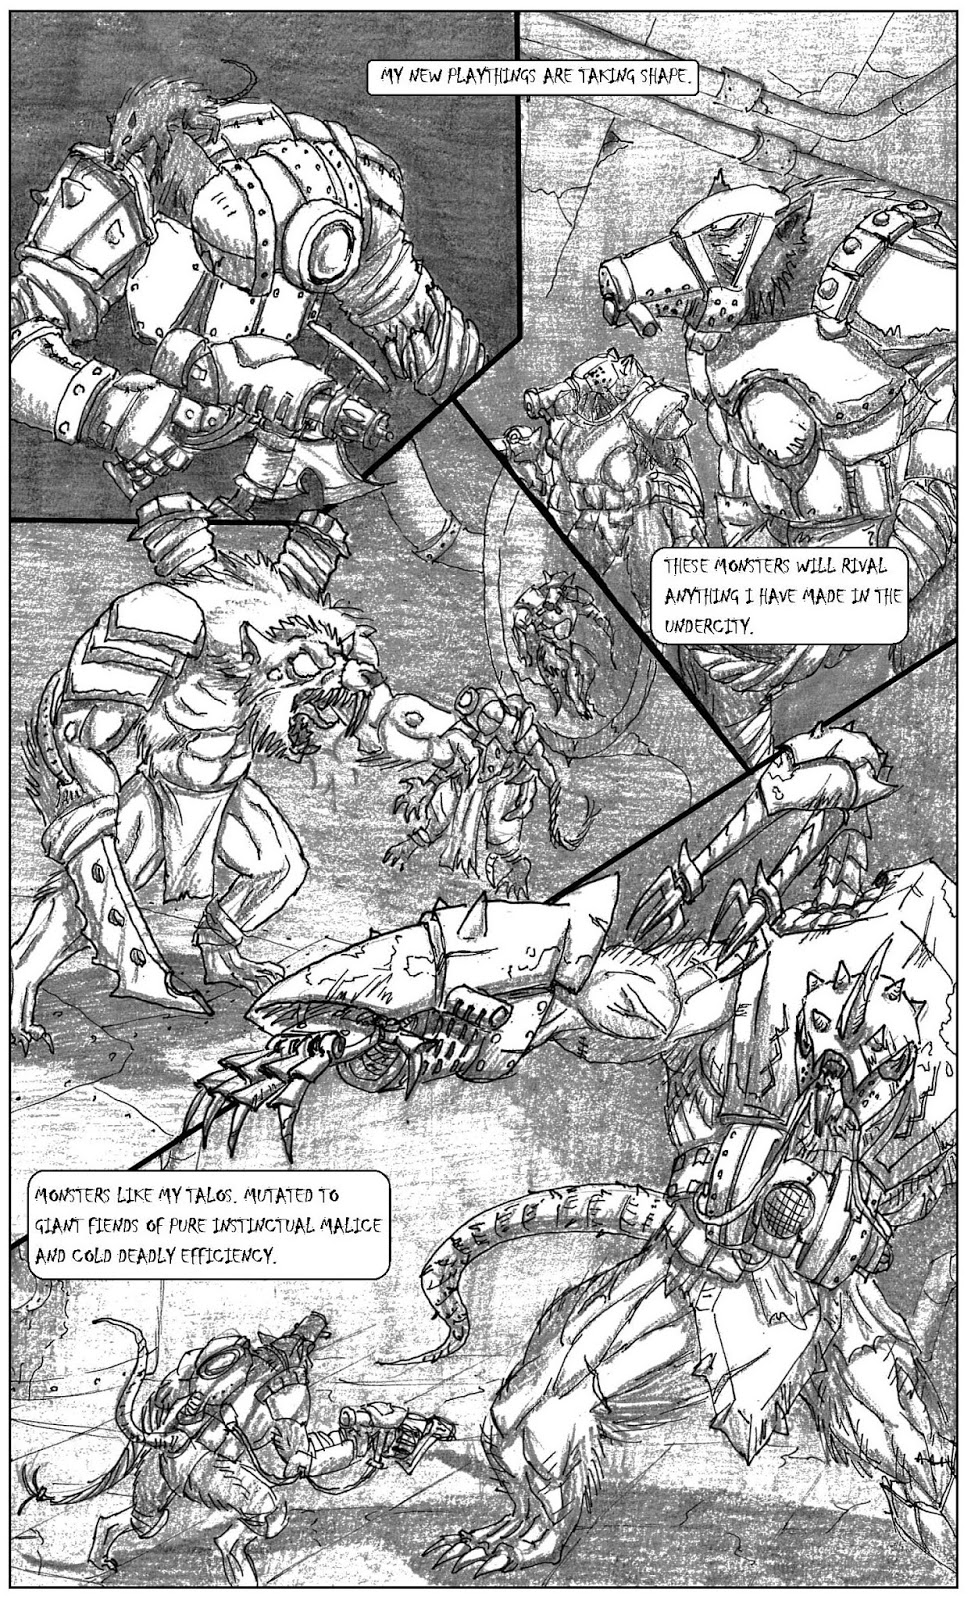 The Coven of Verminlord Skrax - An unusual Haemonculus Coven Page5